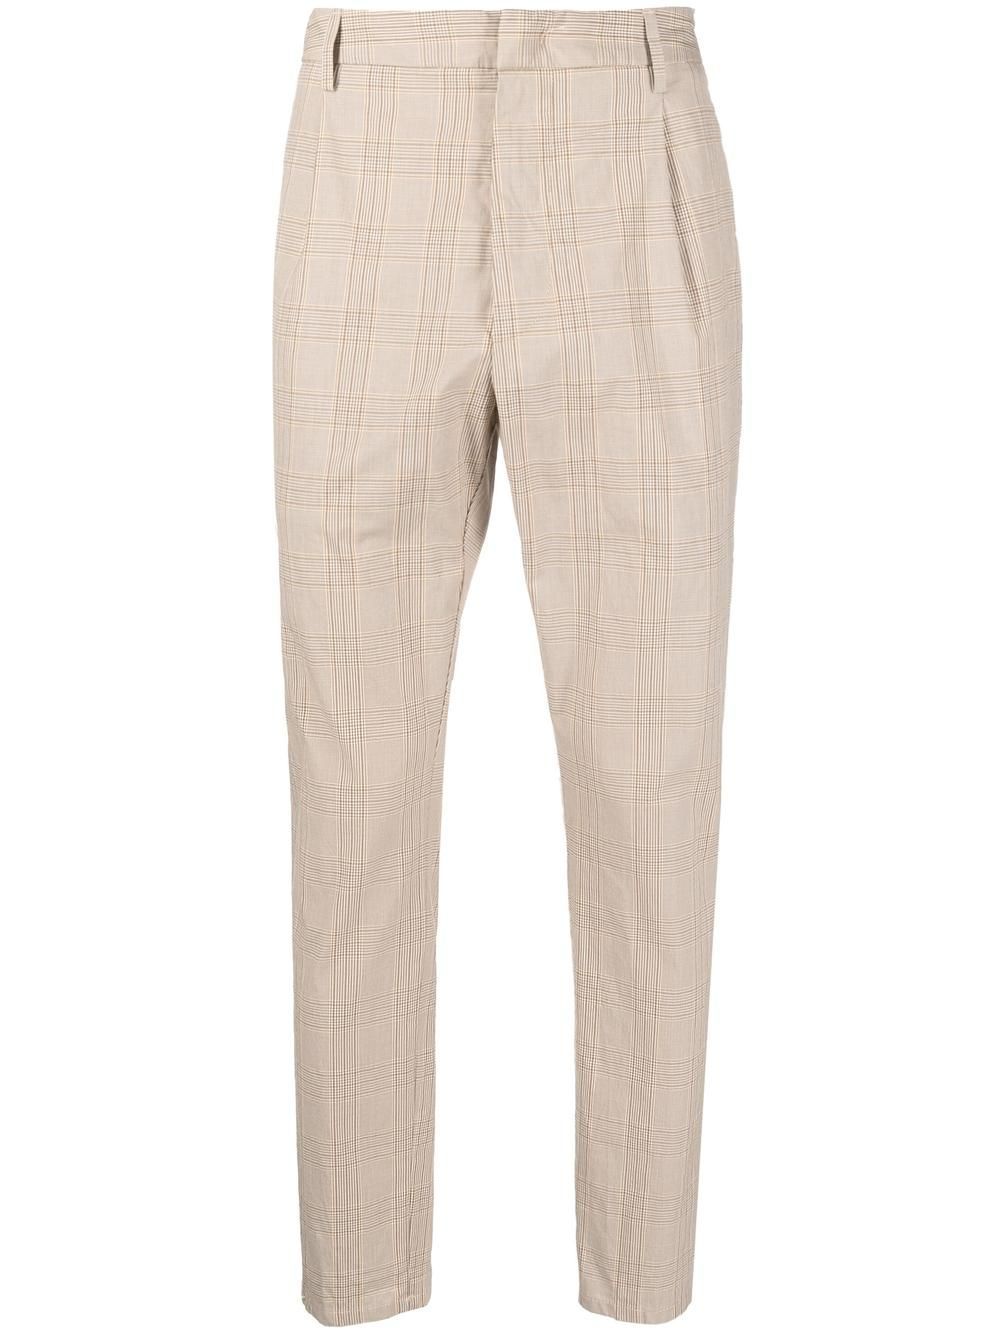 Buy Boys Brown Slim Fit Check Trousers Online - 682390 | Allen Solly